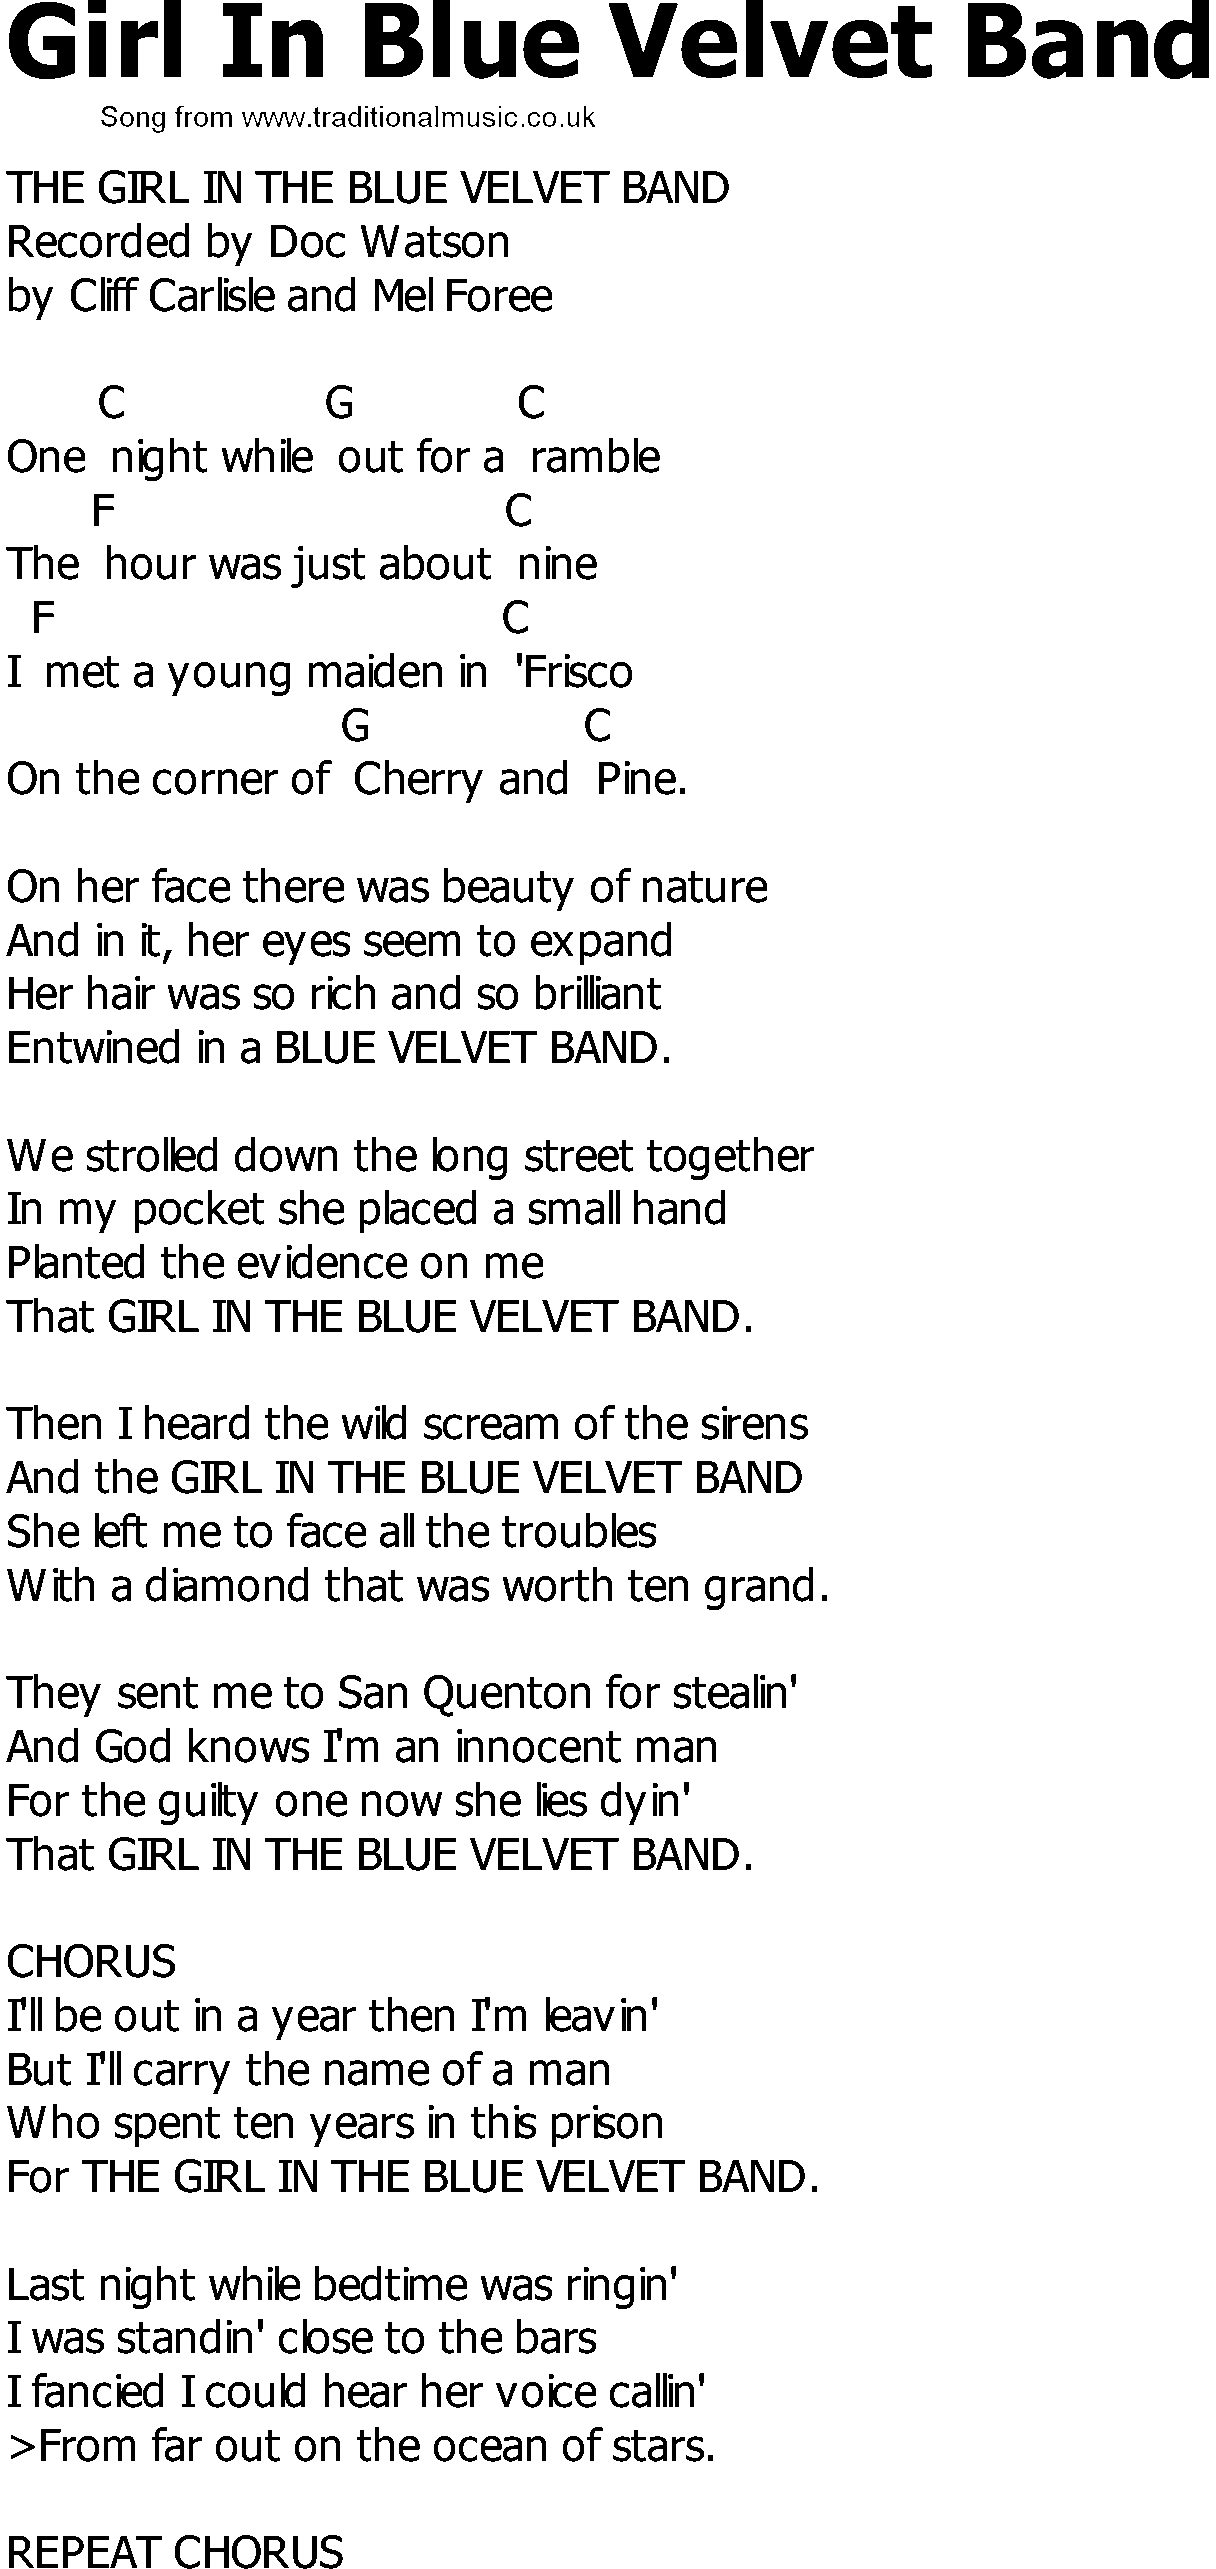 Old Country song lyrics with chords - Girl In Blue Velvet Band